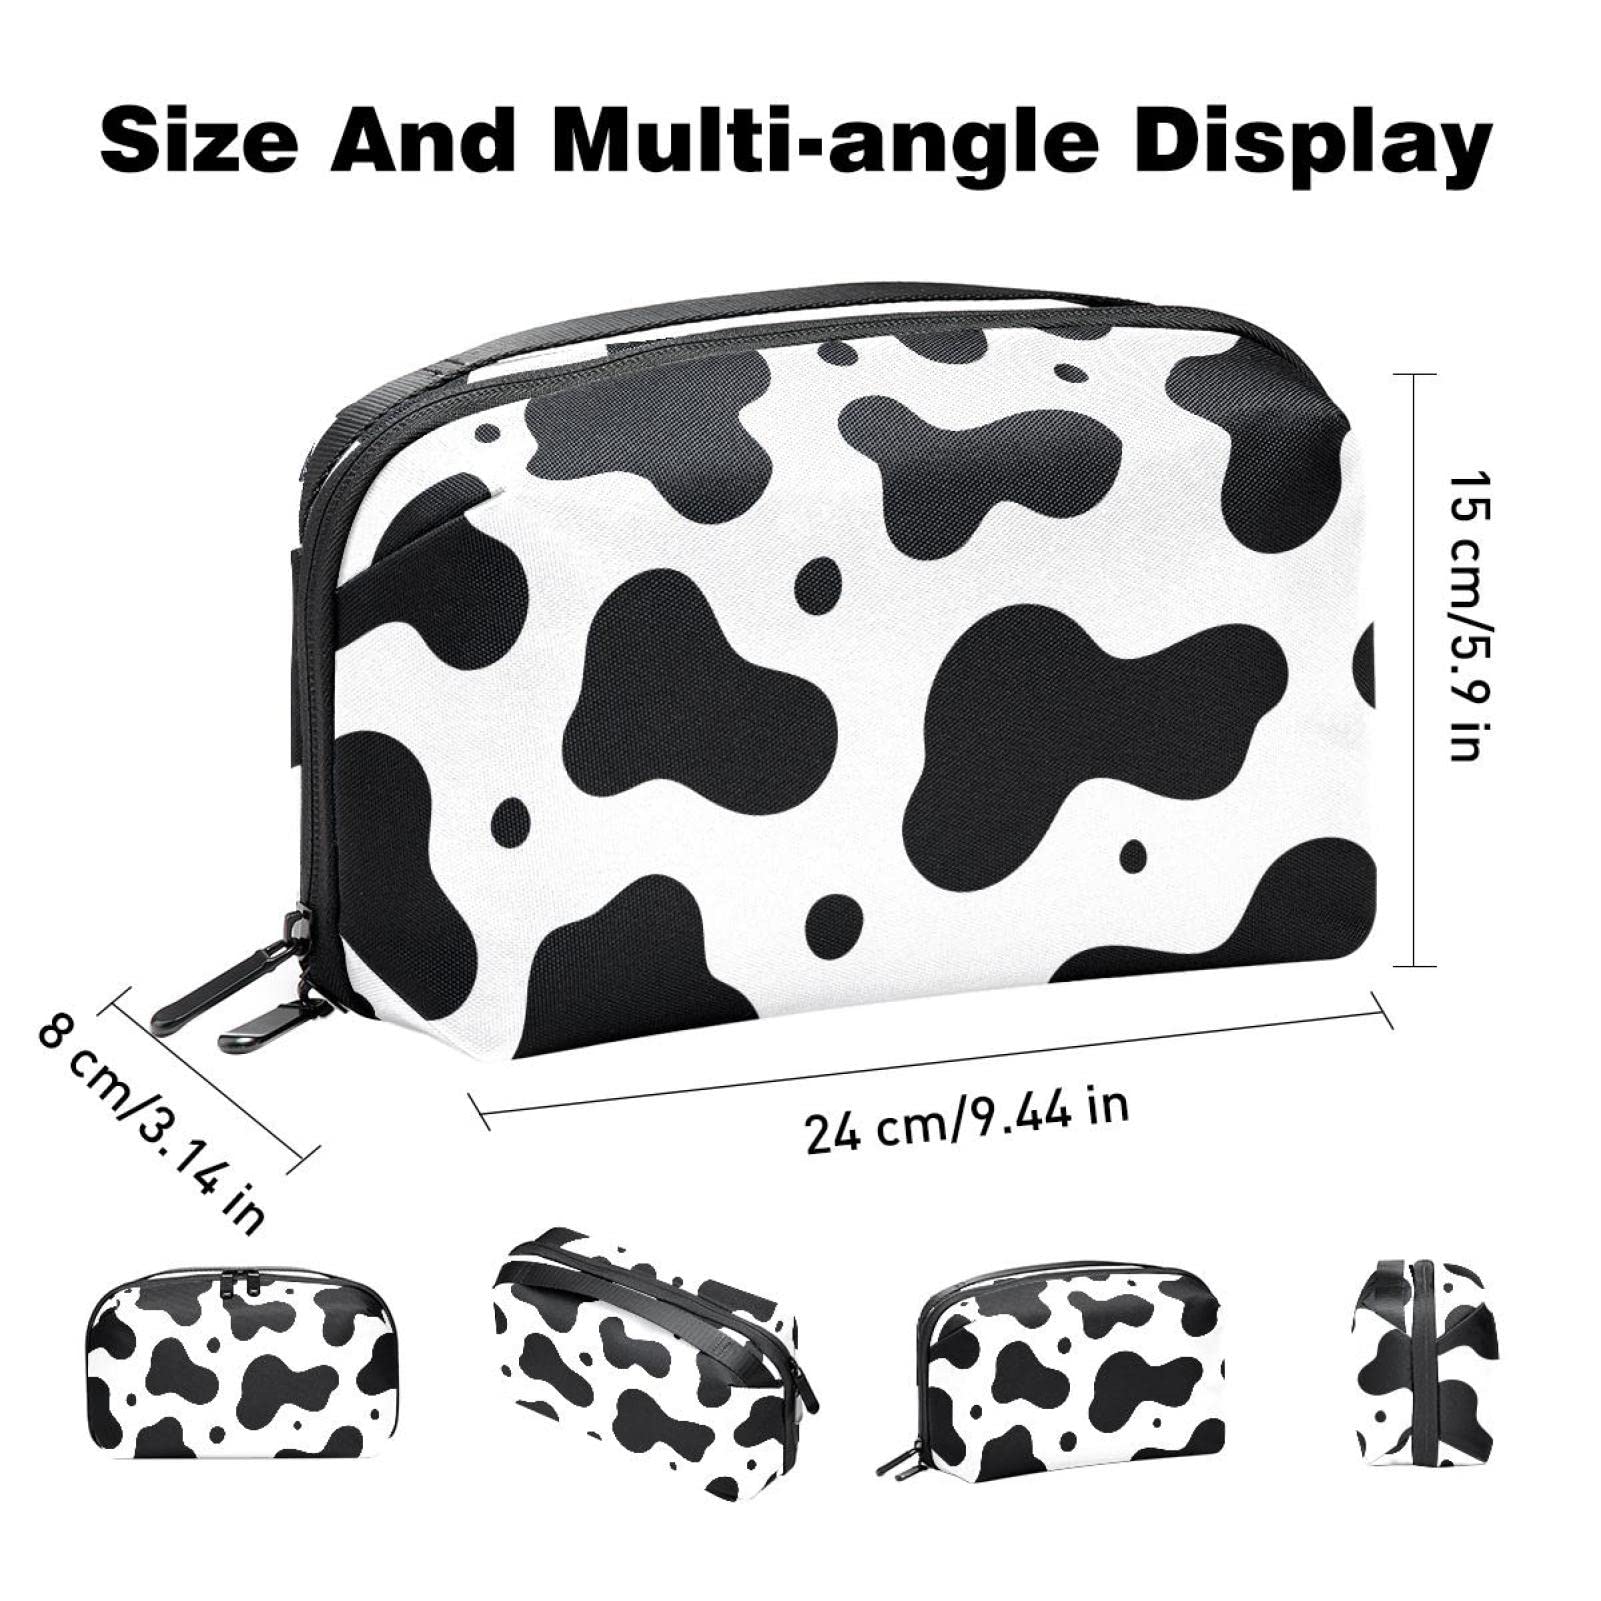 Electronics Organizer, Cow Skin Animal Small Travel Cable Organizer Carrying Bag, Compact Tech Case Bag for Electronic Accessories, Cords, Charger, USB, Hard Drives